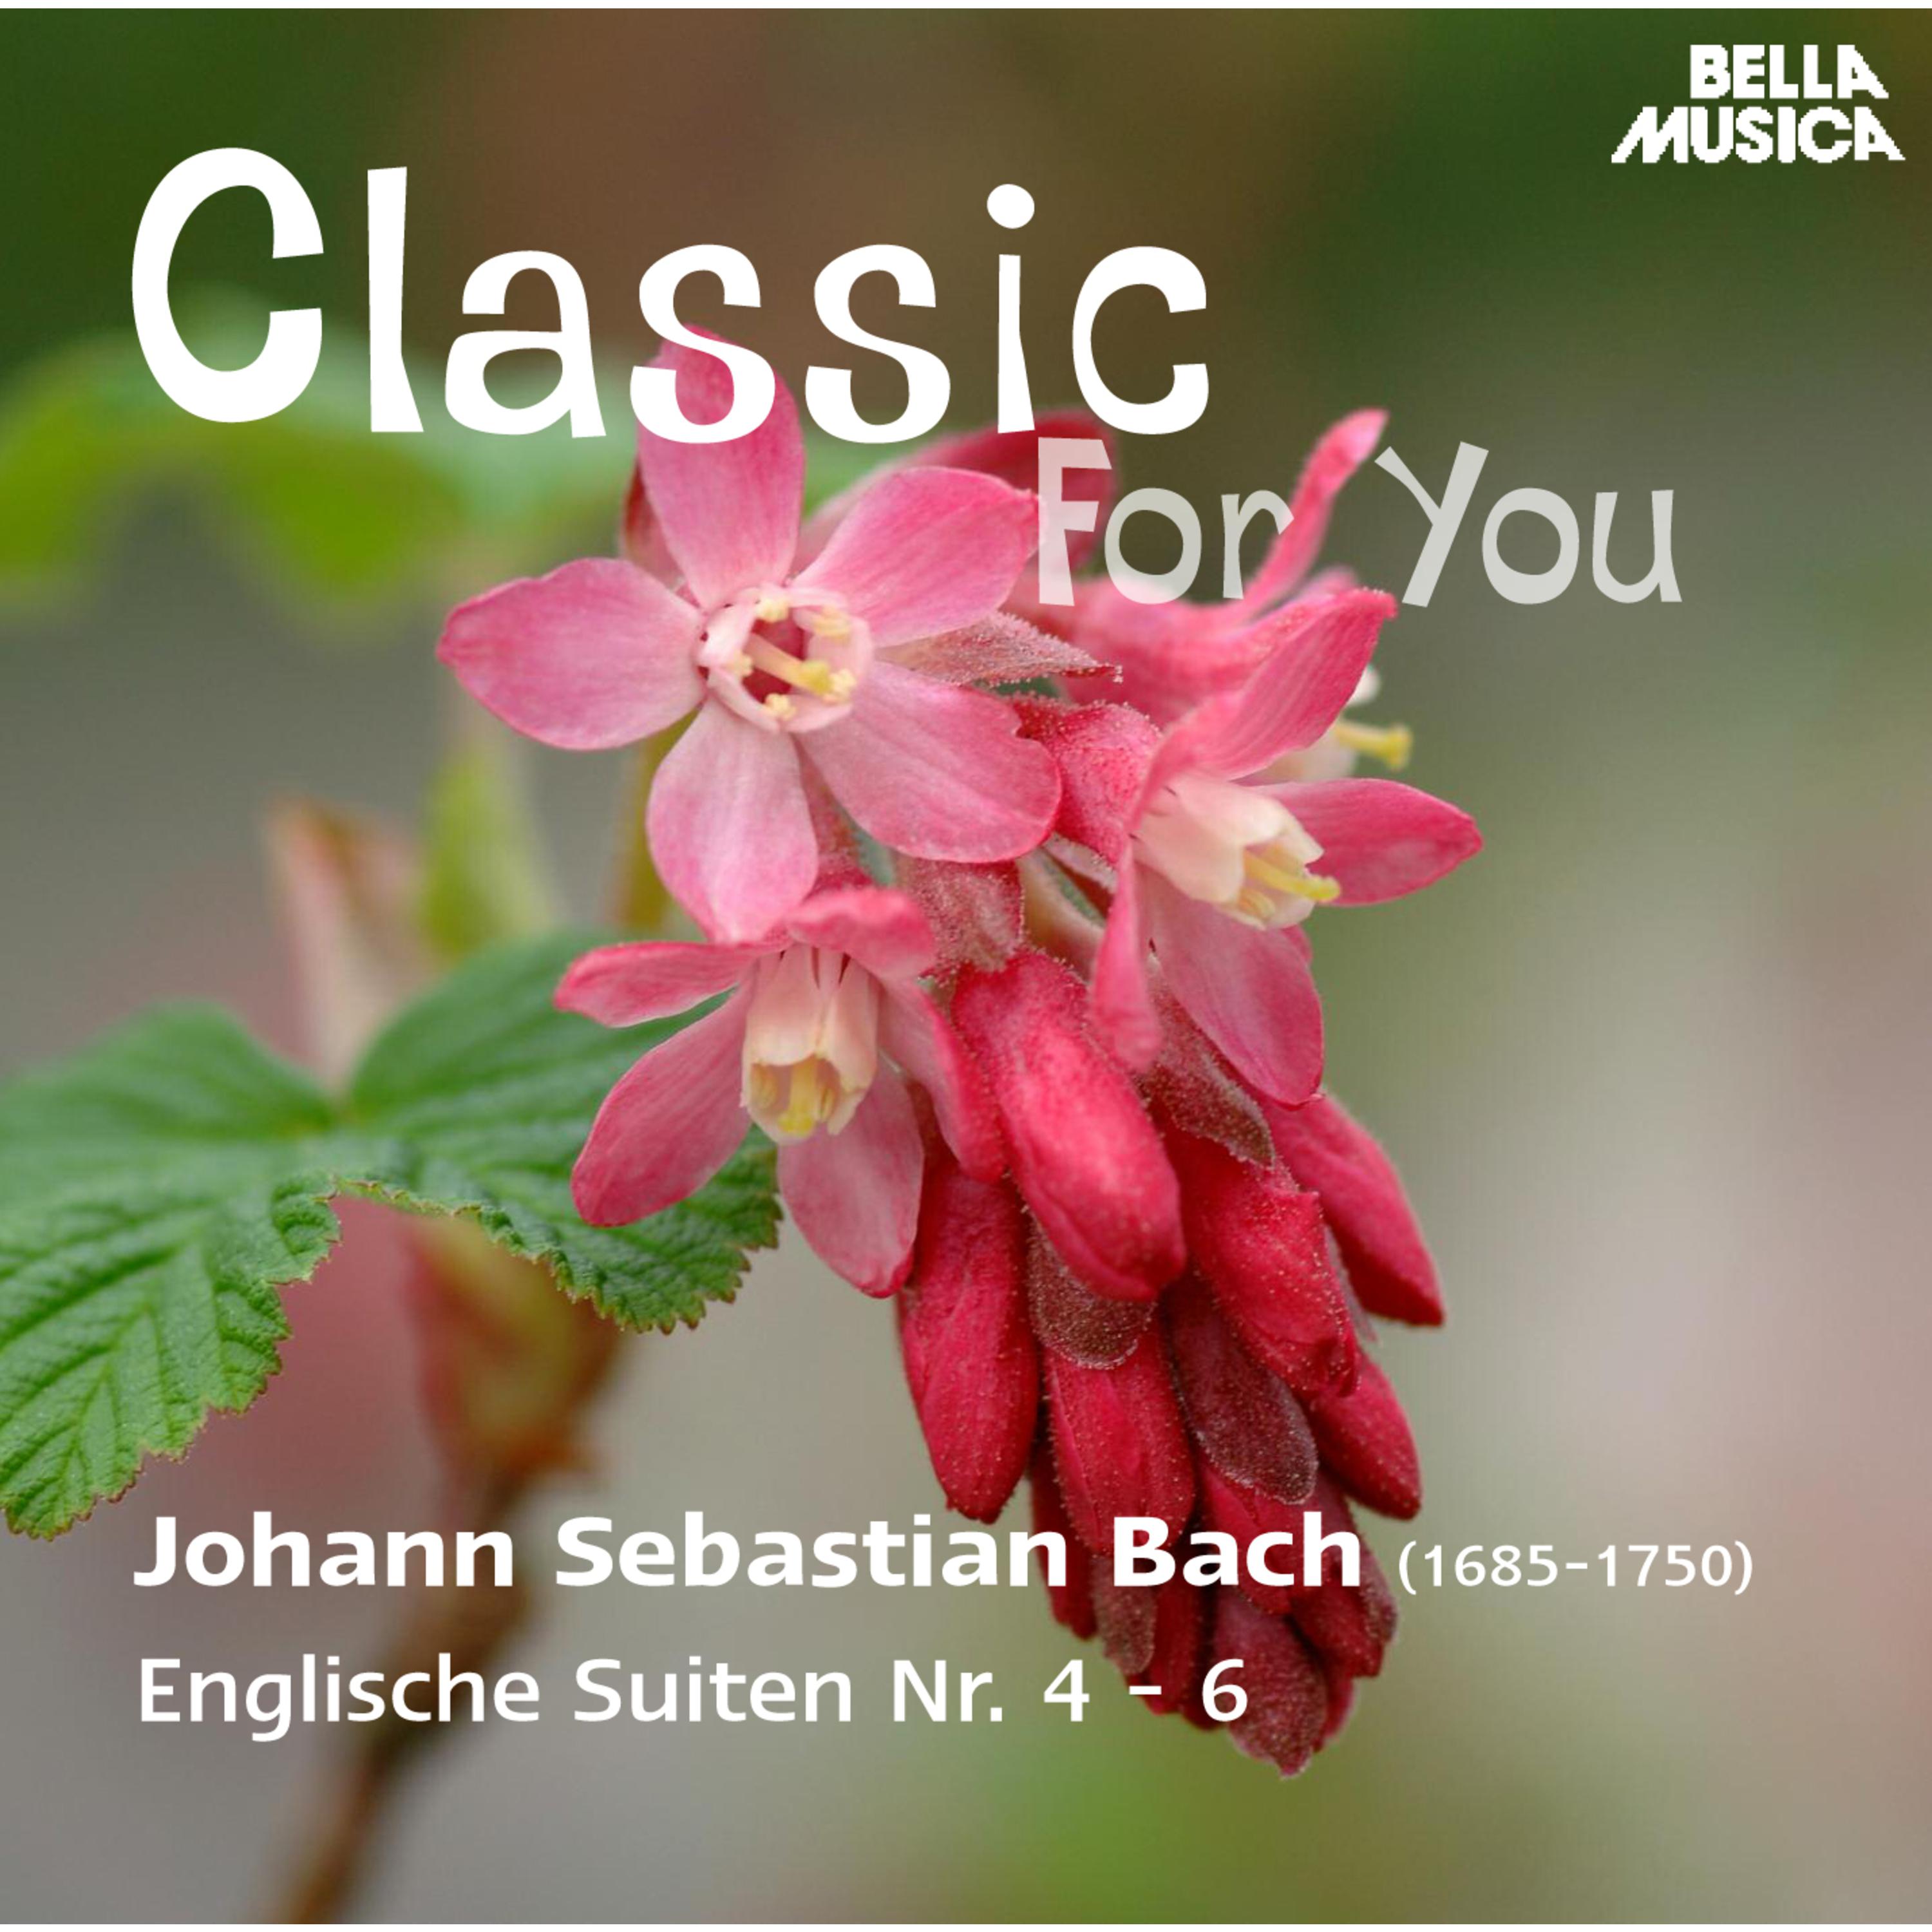 Classic for You: Bach - Englische Suiten No. 4-6